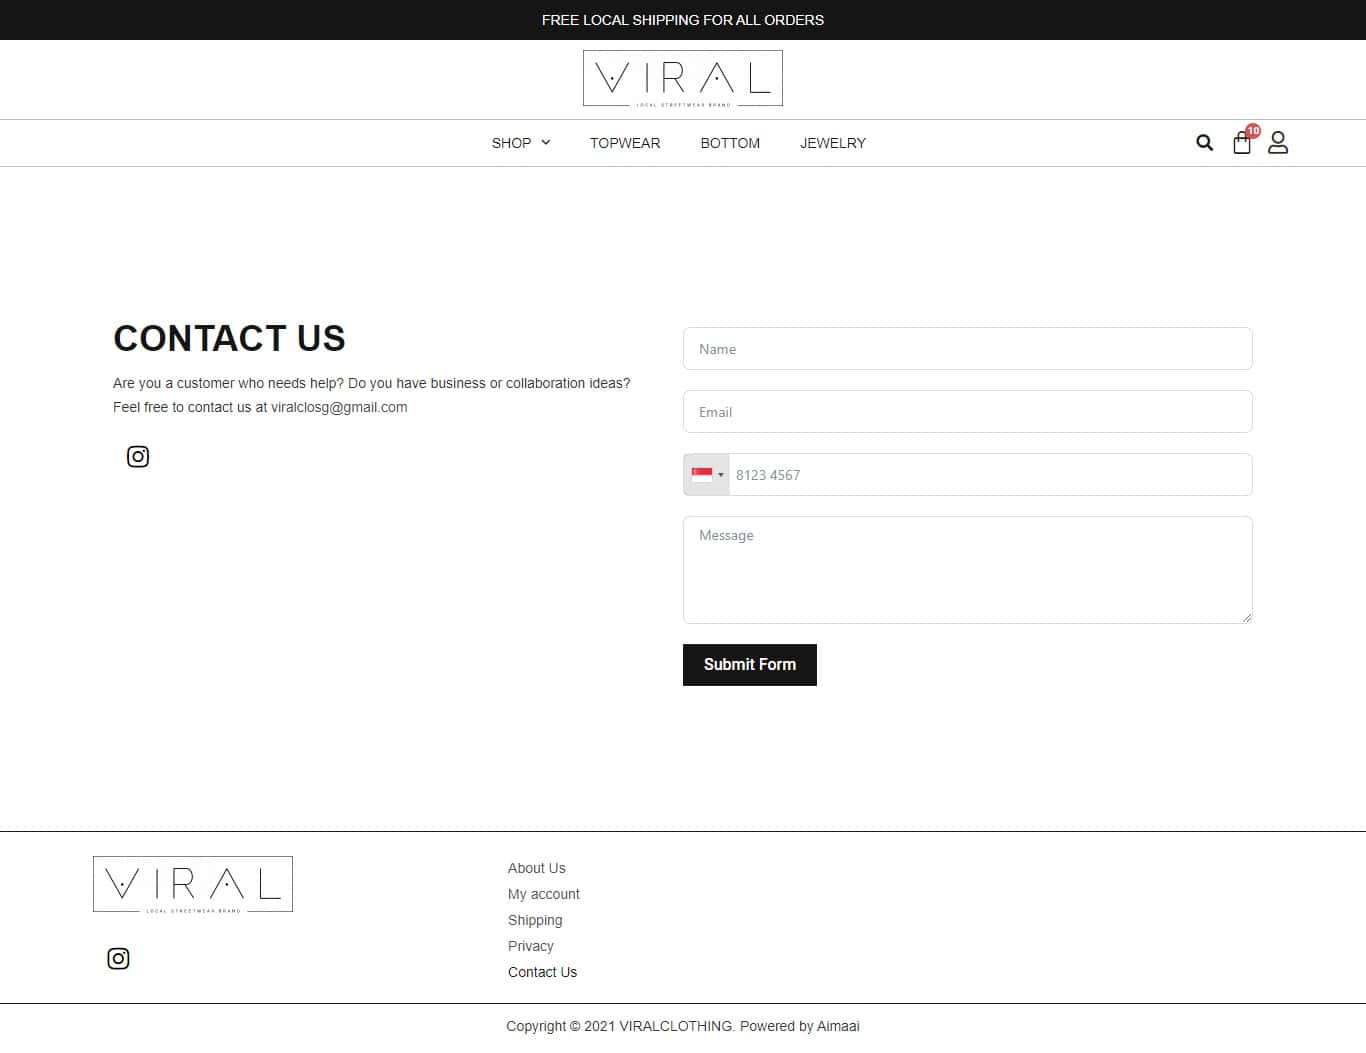 Viral online store's contact us page.